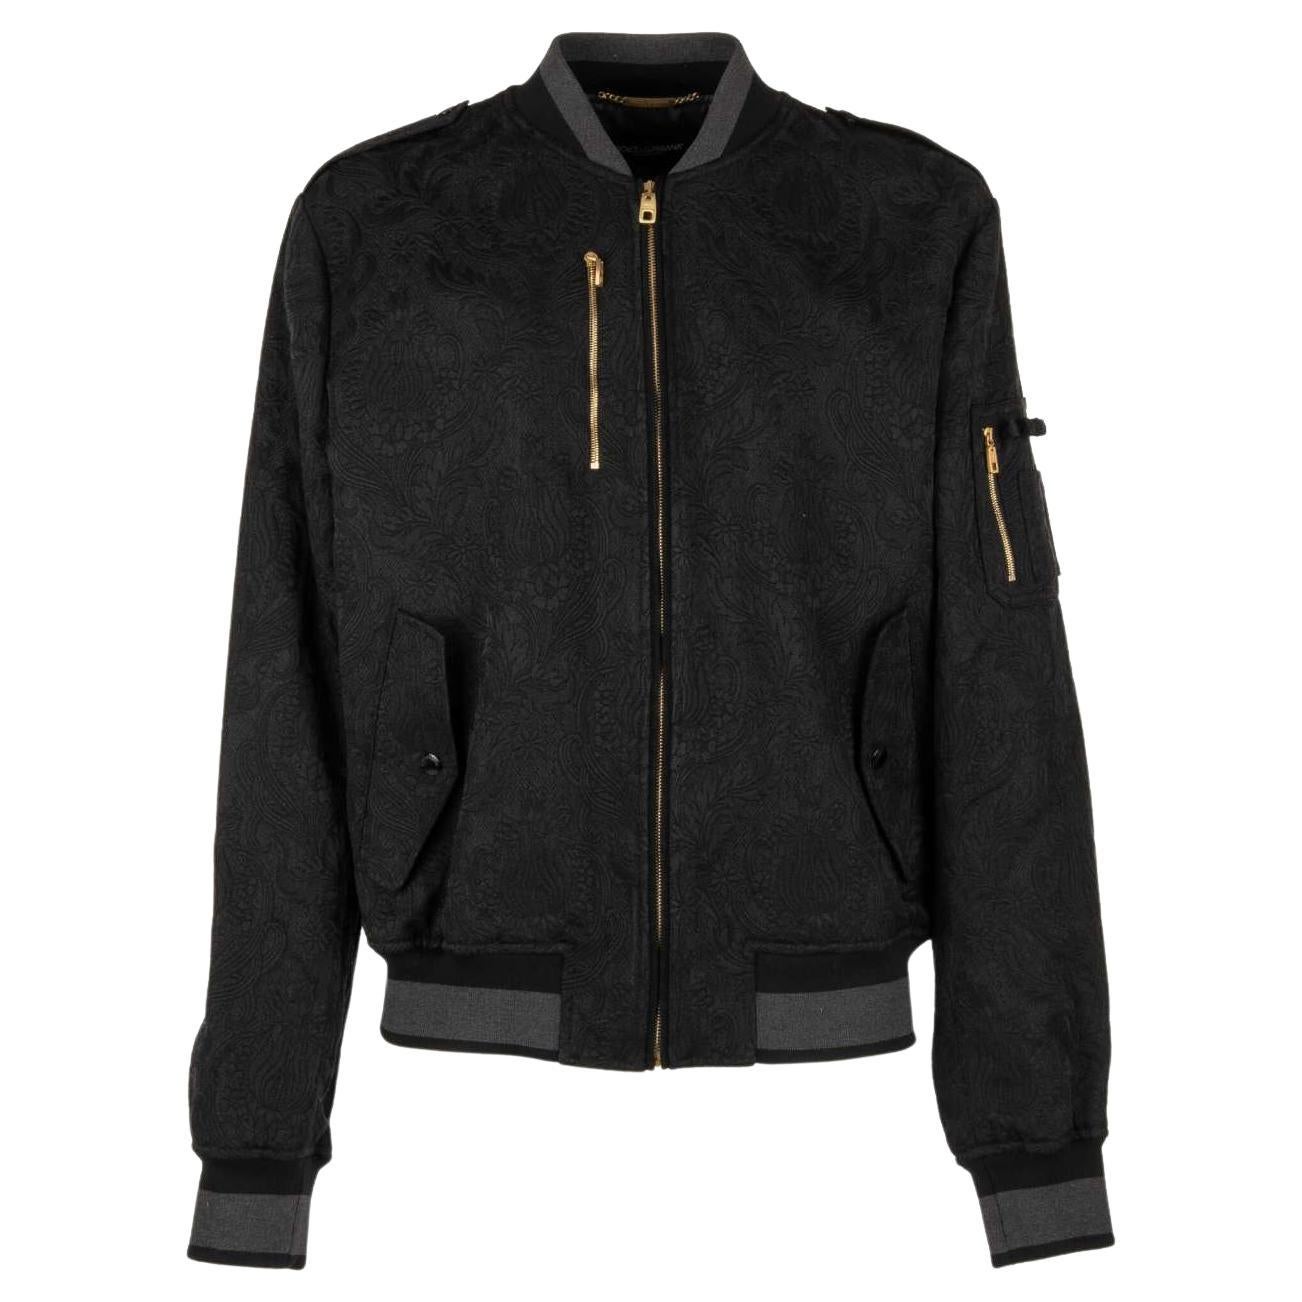 Dolce & Gabbana Brocade Bomber Jacket with Zip Closure and Pockets Black 56 For Sale